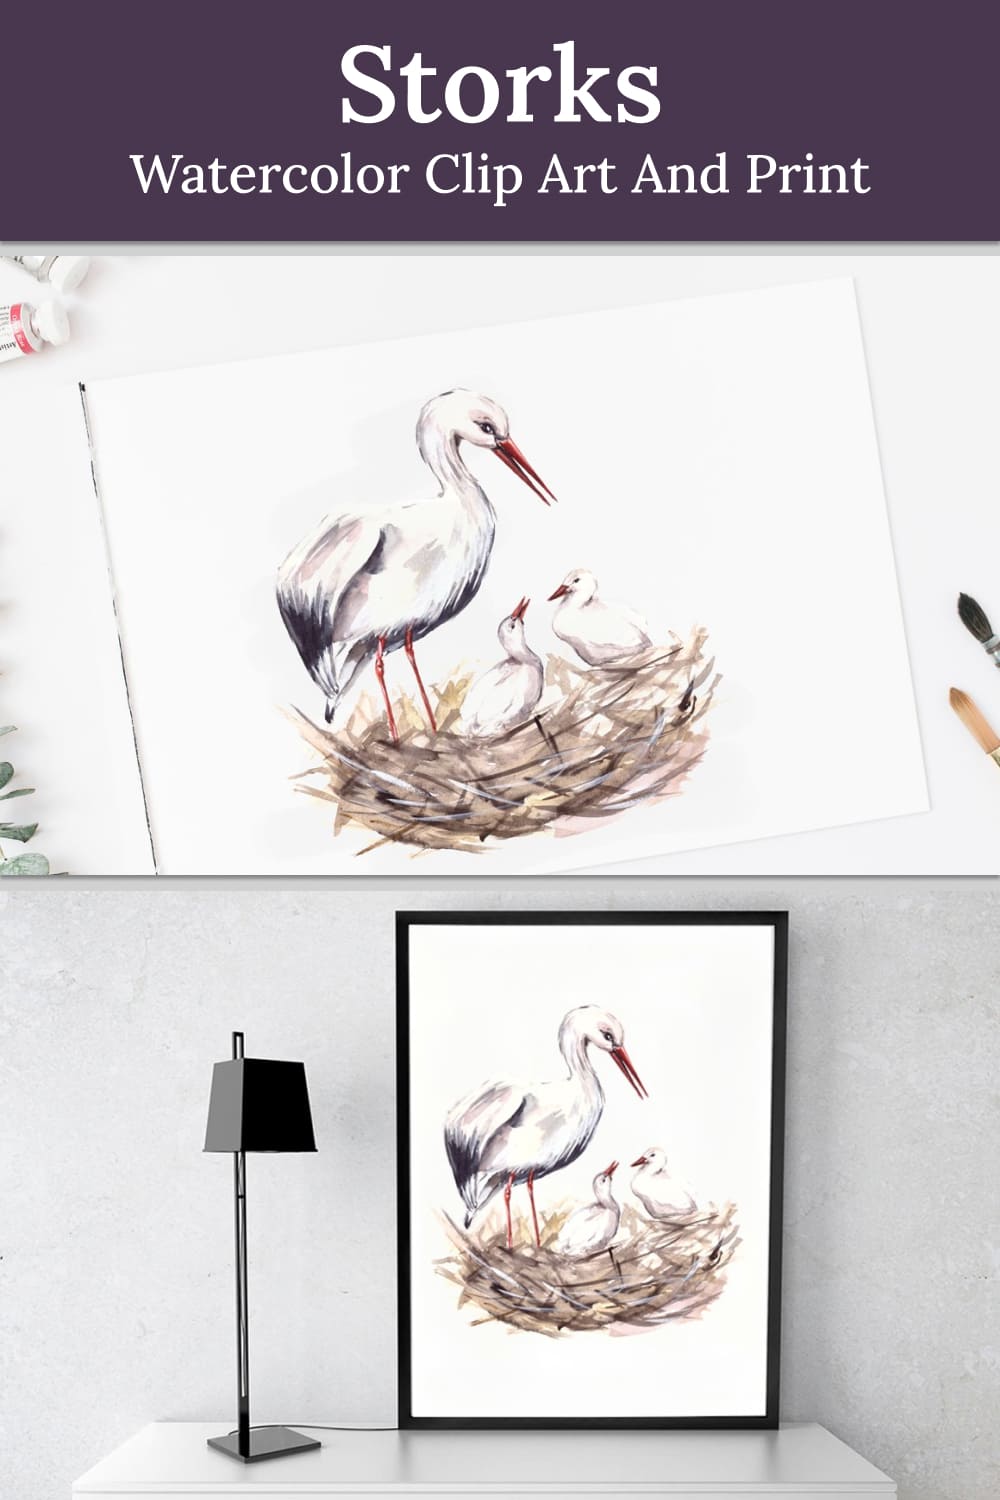 Storks watercolor clip art and print - pinterest image preview.